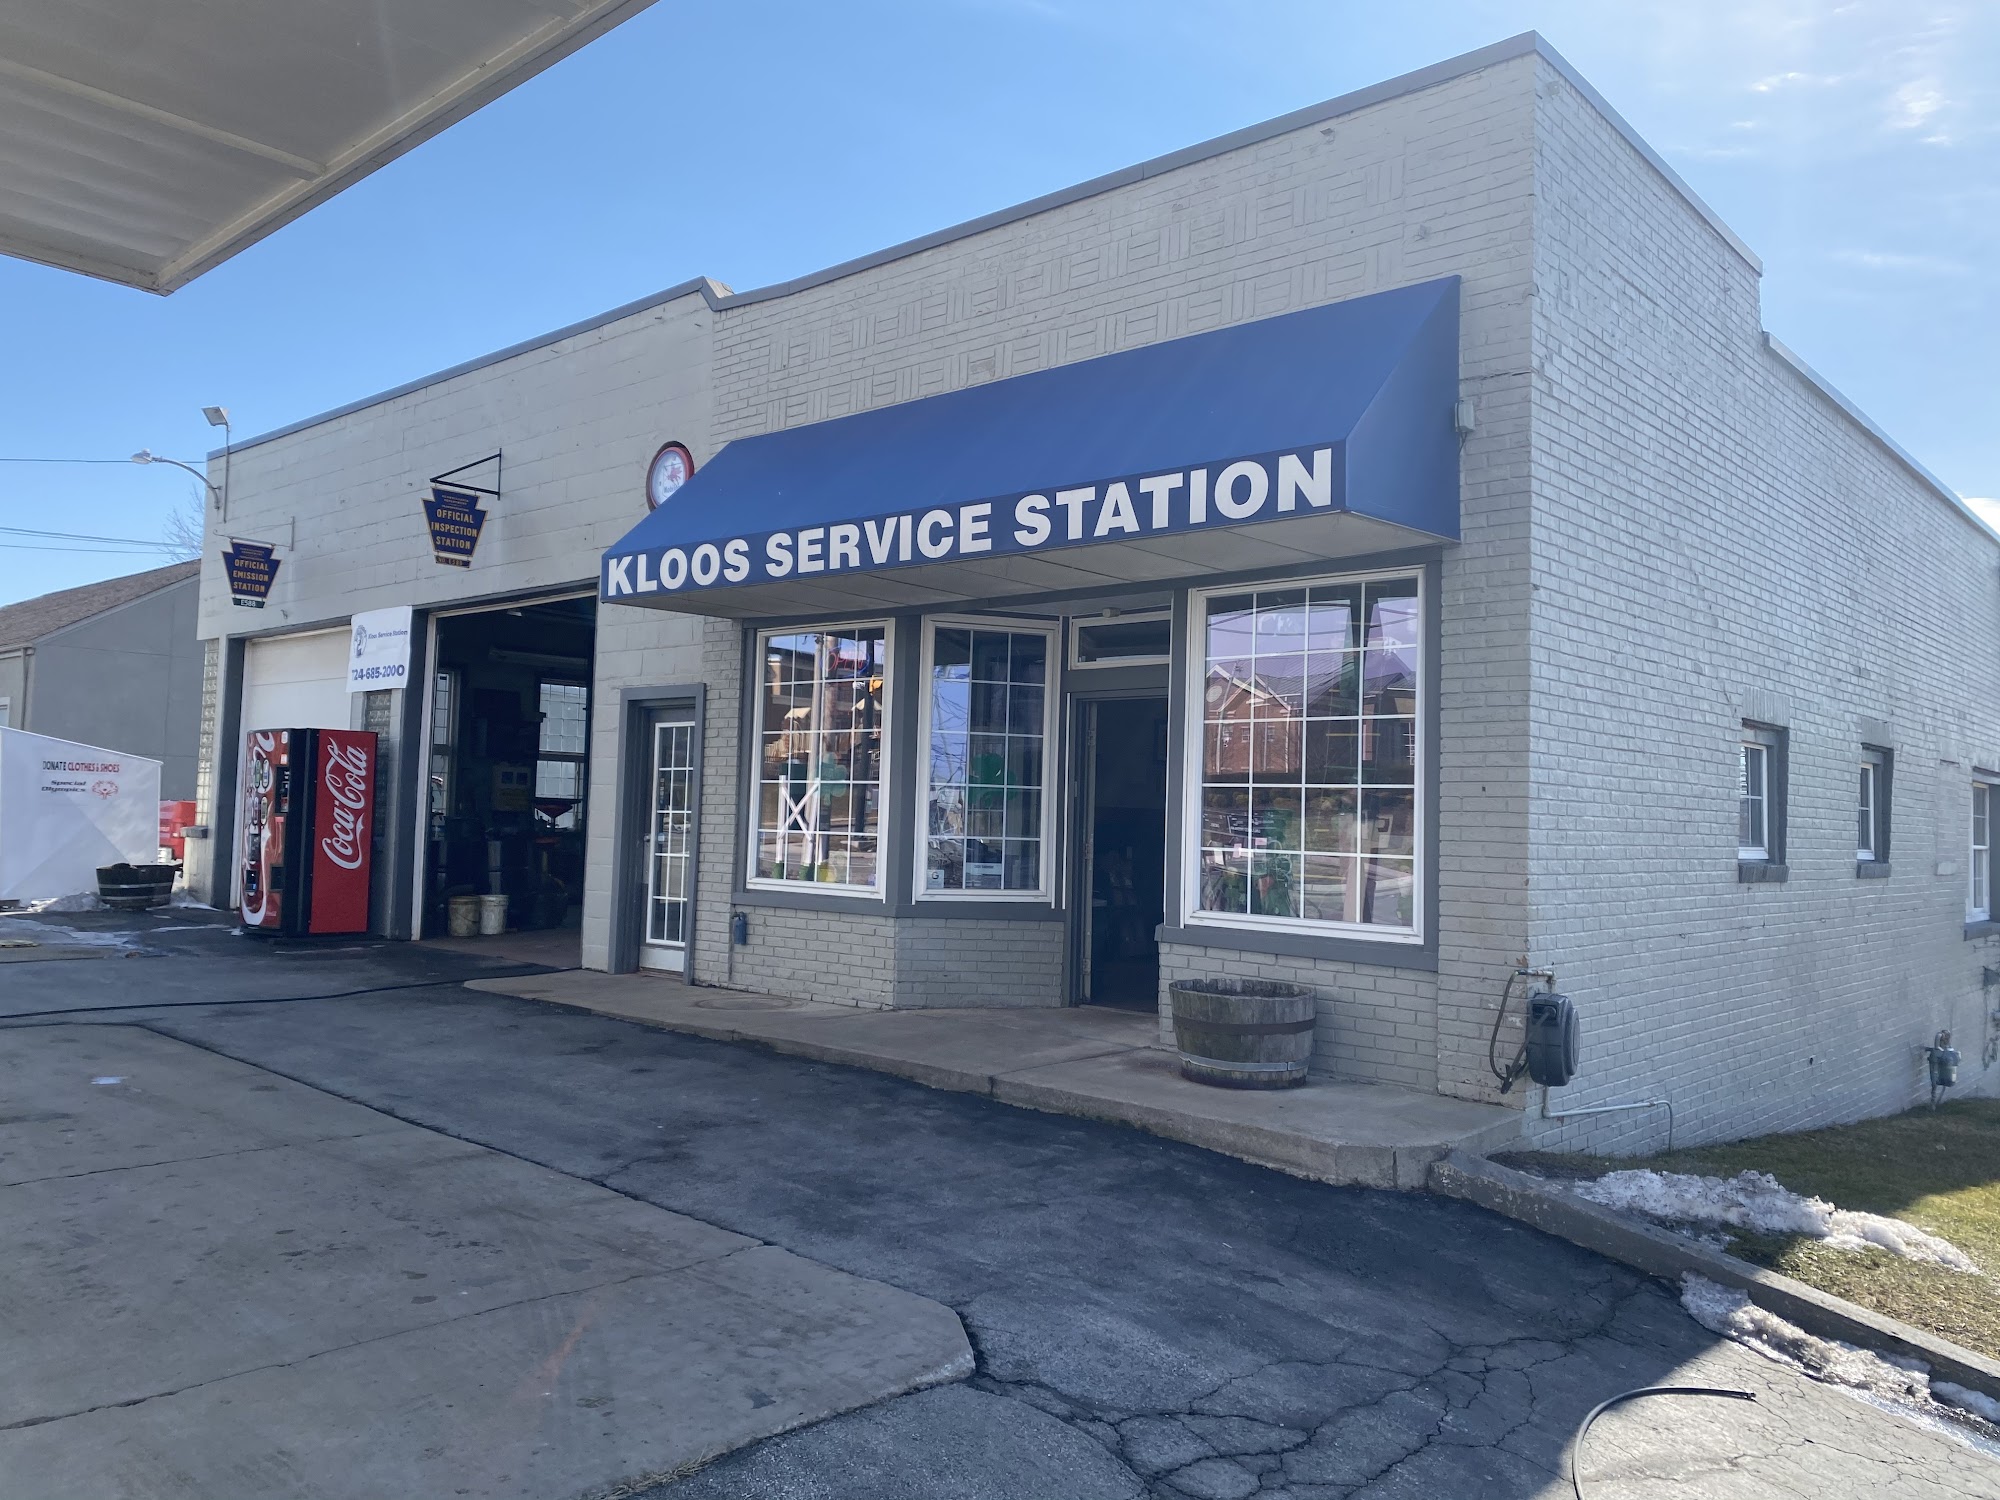 Kloos Services Station